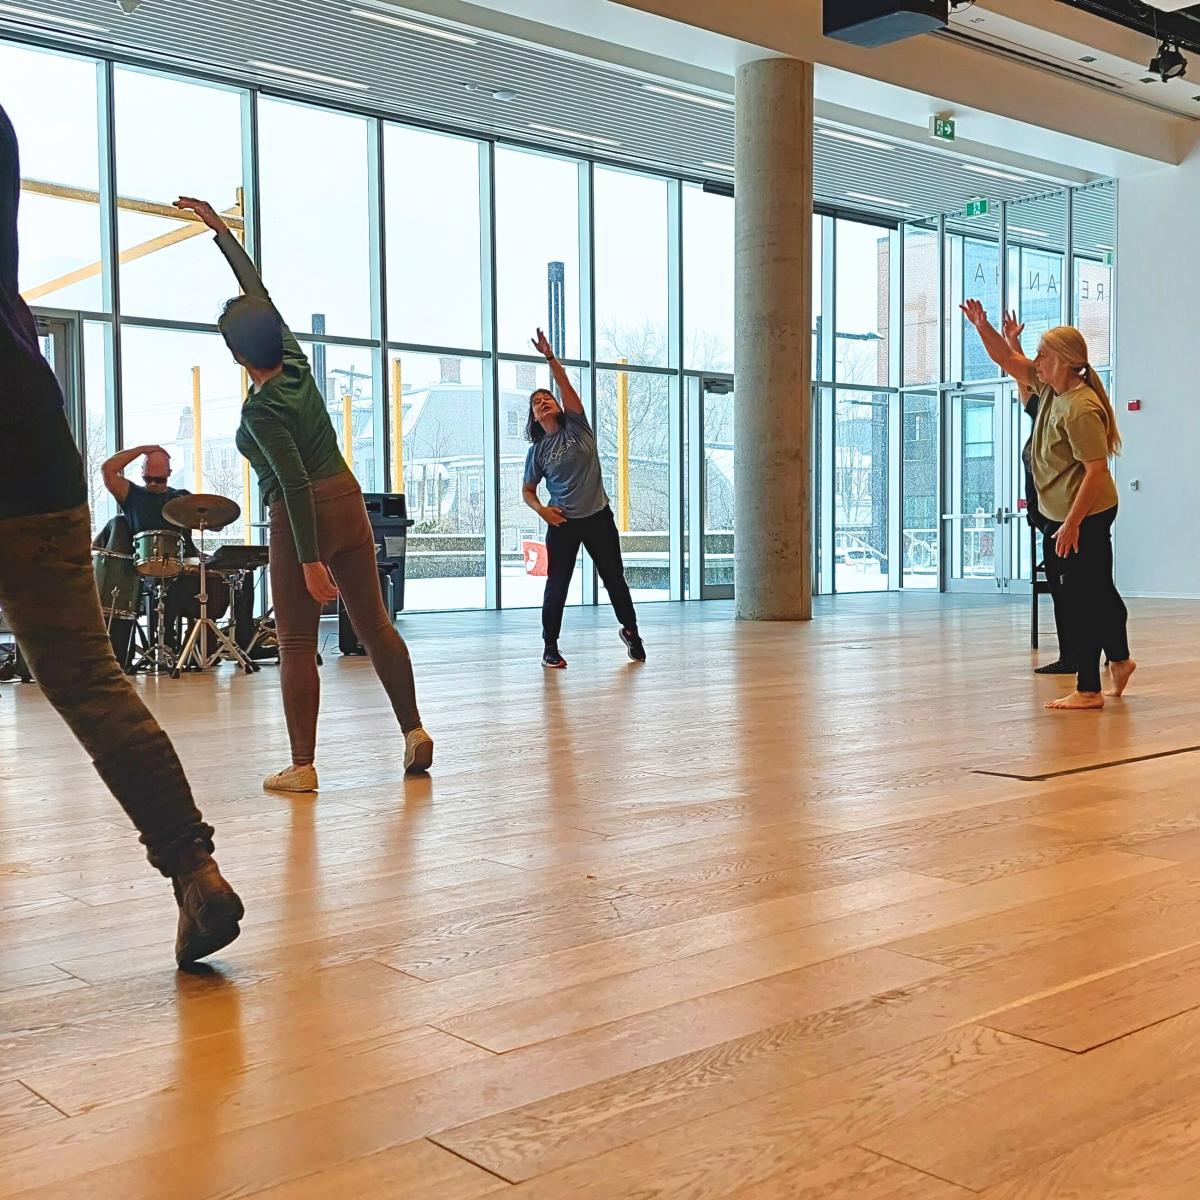 A group of people dance in a space with wood floors and a wall of windows